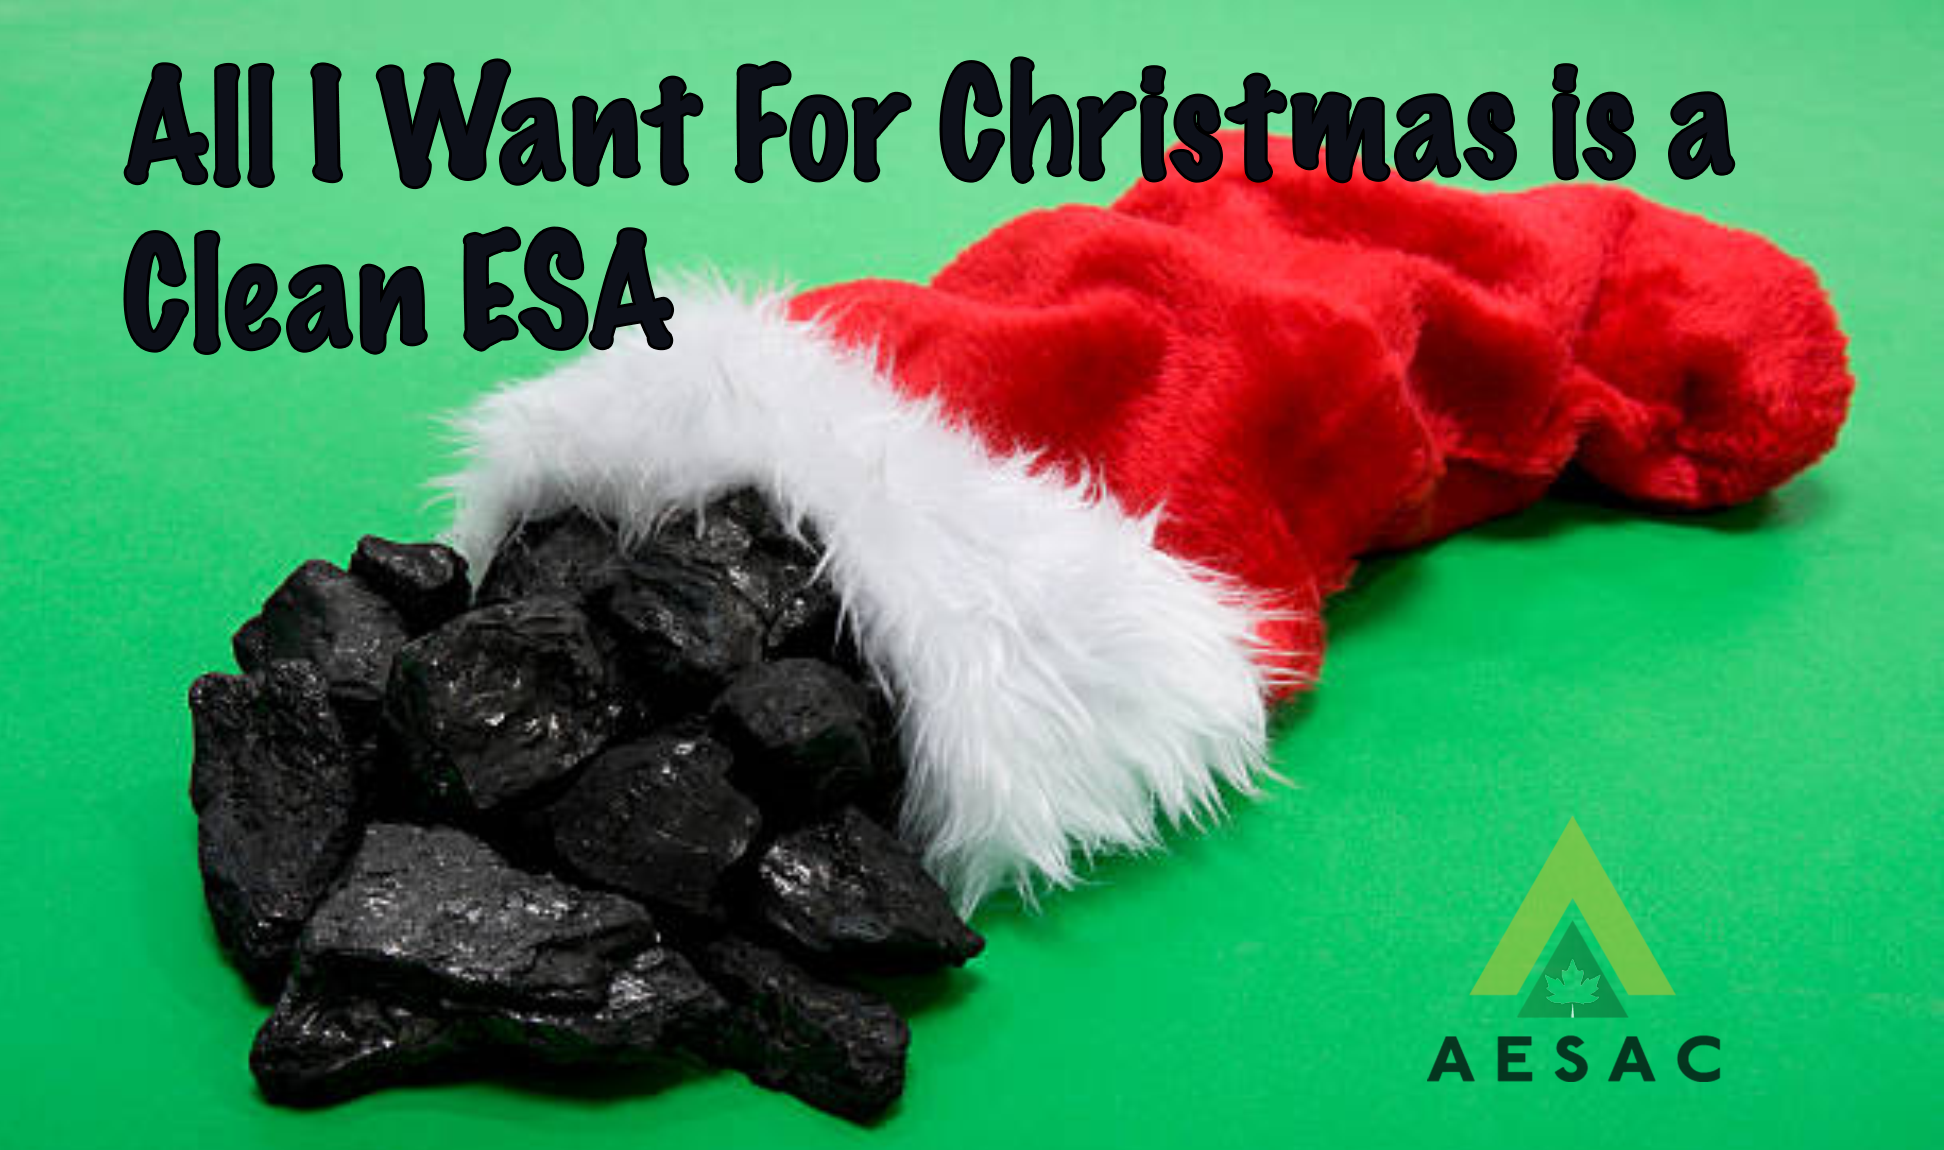 All I Want for Christmas is a 'Clean' ESA